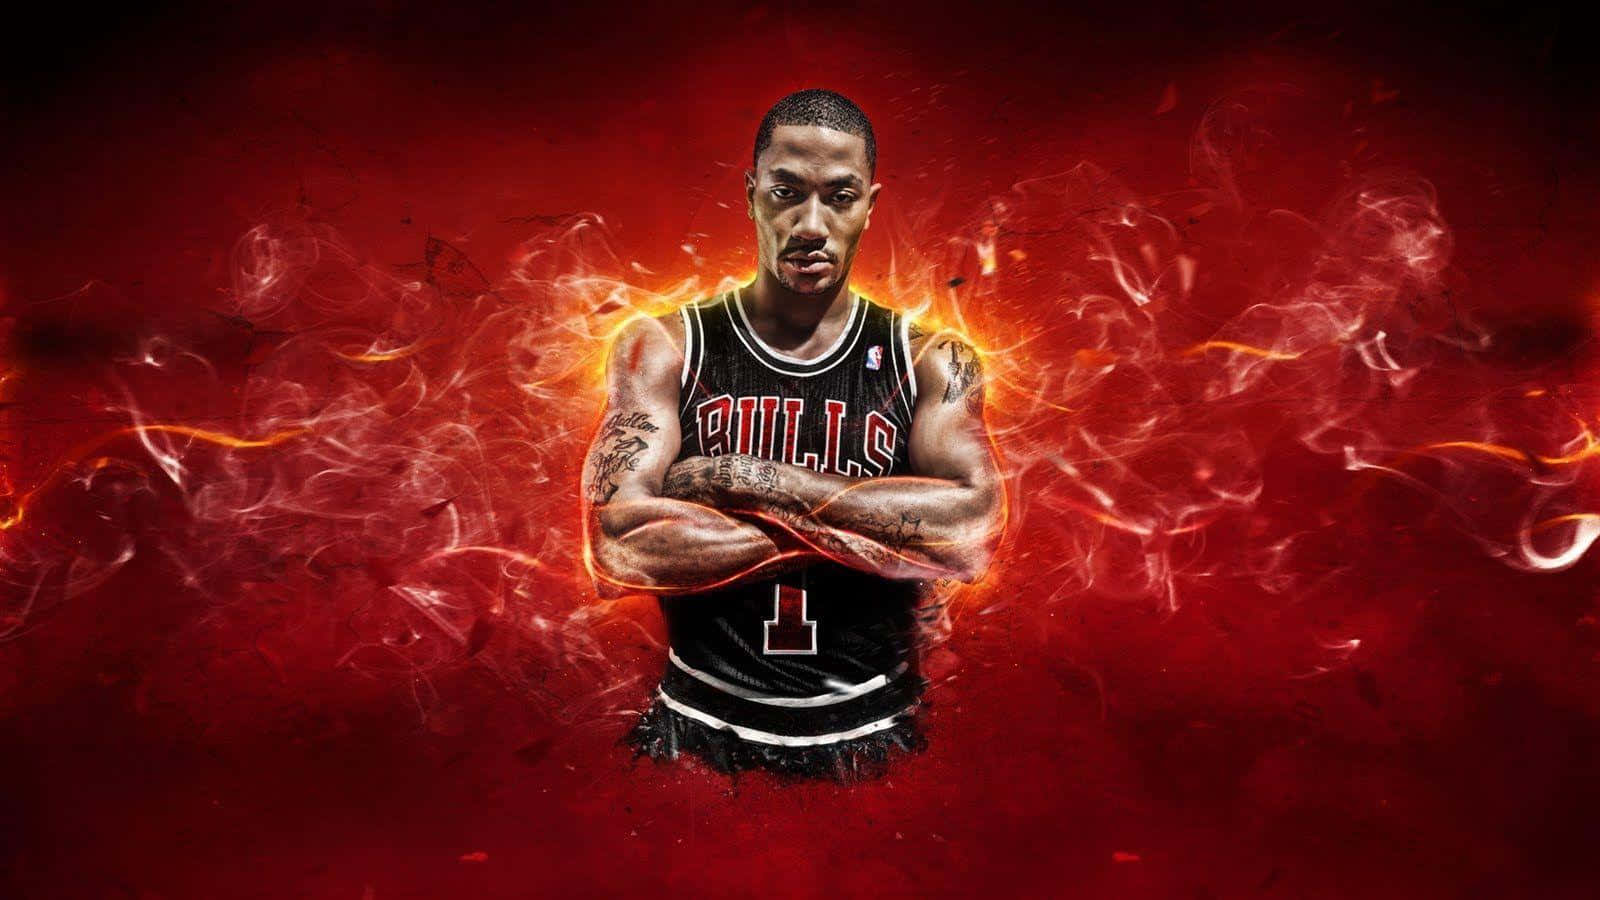 Derrick Rose Continually Drives for Success Wallpaper